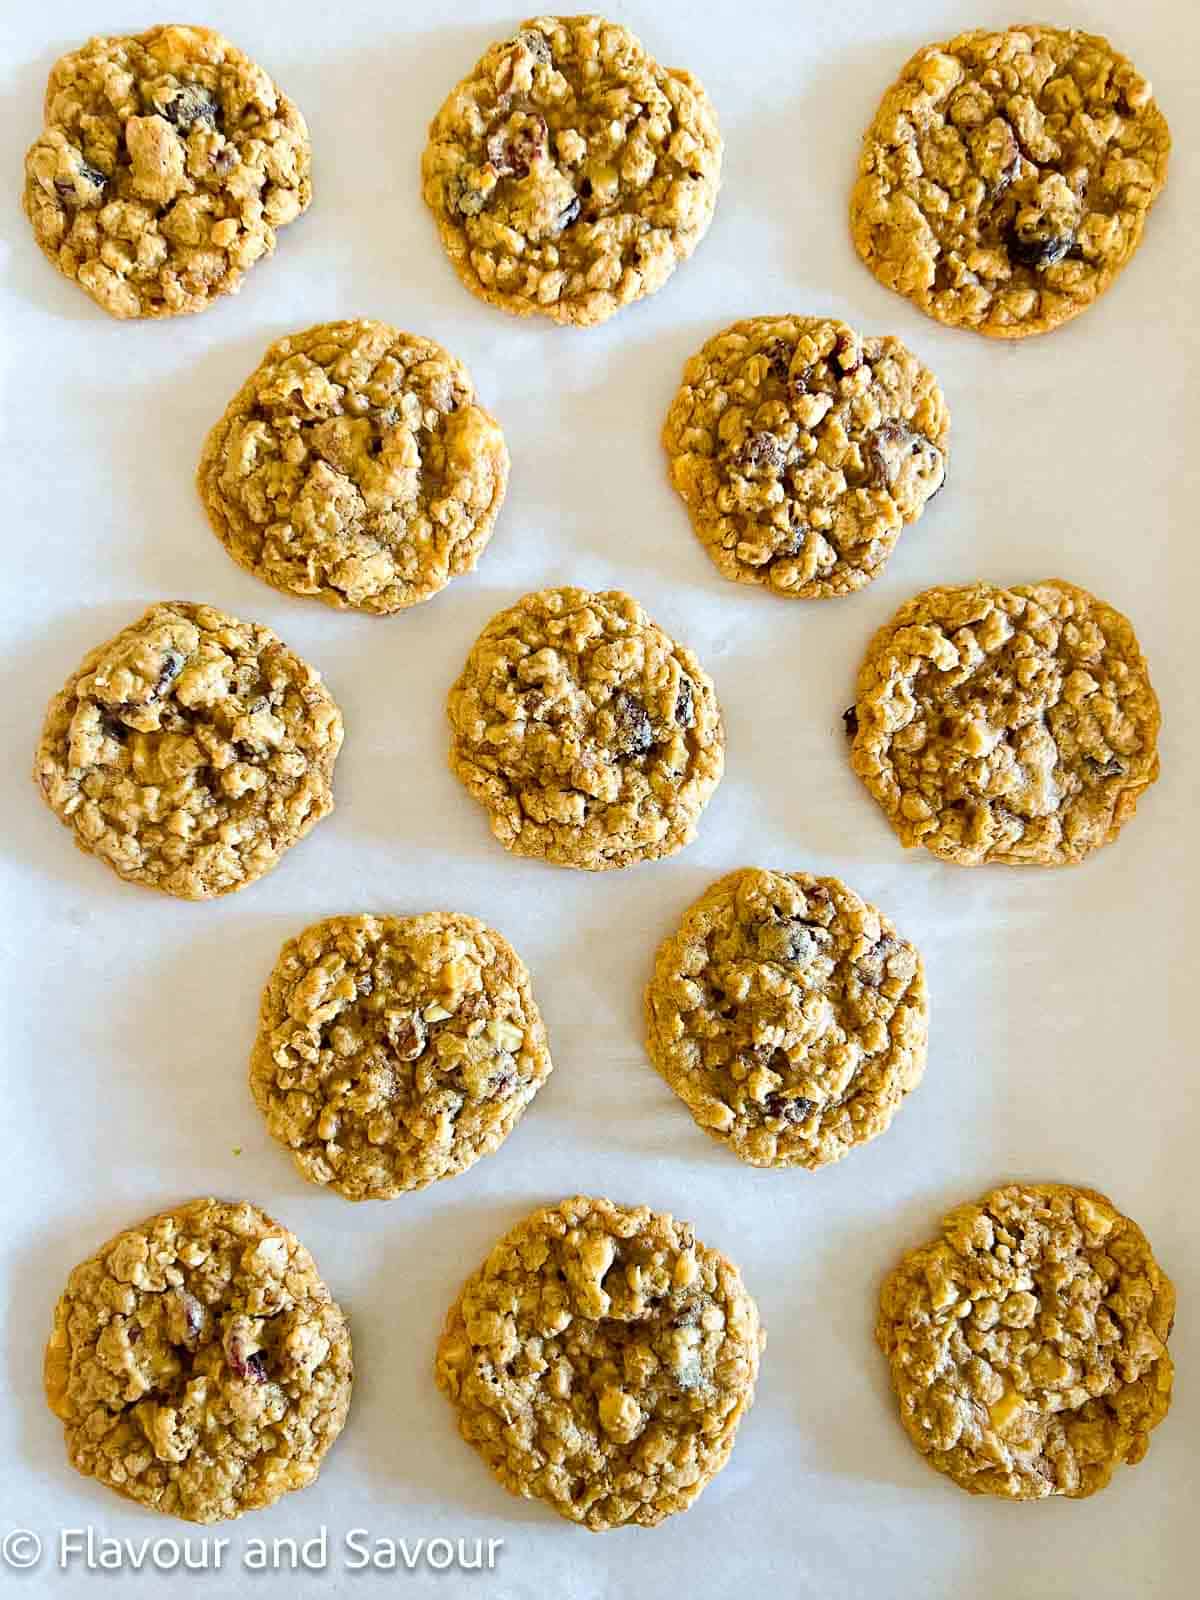 Cranberry oatmeal cookies on a baking sheet after baking.